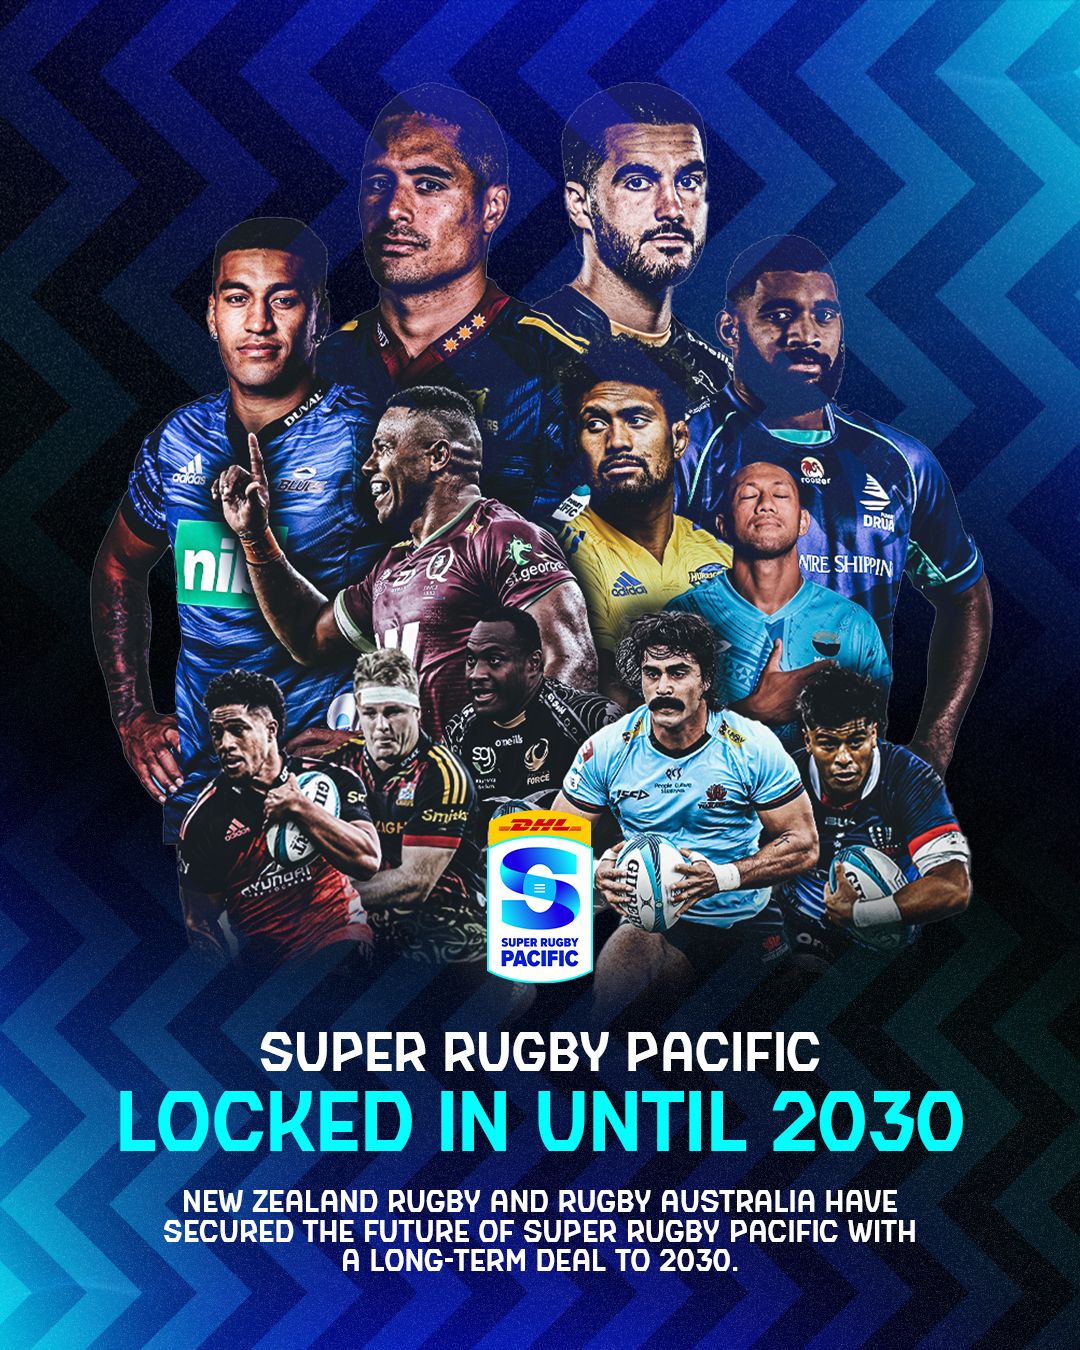 Super Rugby Pacific locked in until 2030 Moana Pasifika